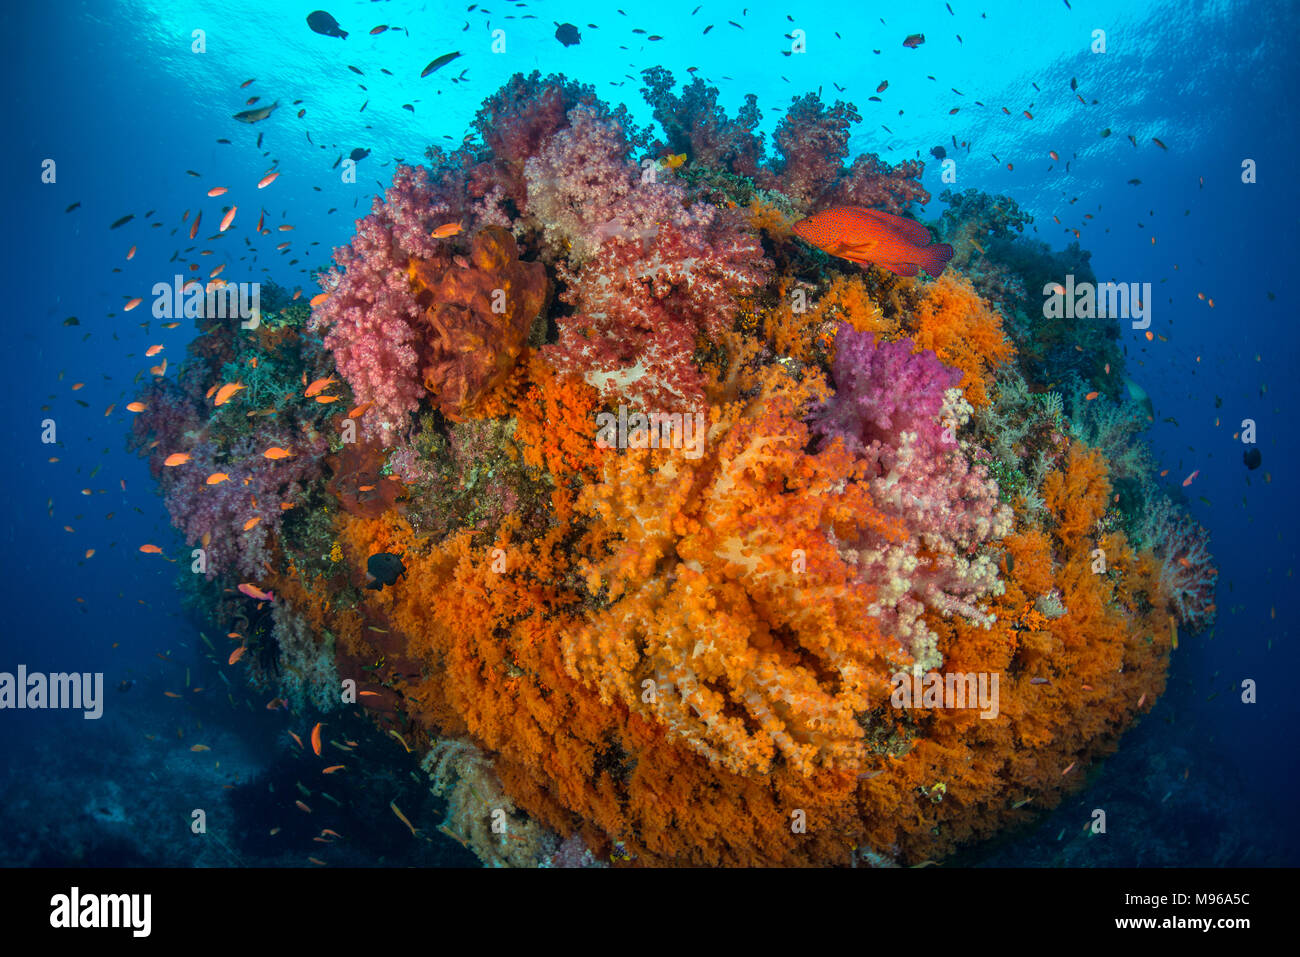 Soft coral, anthias, and a coral grouper on a vibrant coral reef in Misool, Raja Ampat, West Papua, Indonesia. Stock Photo